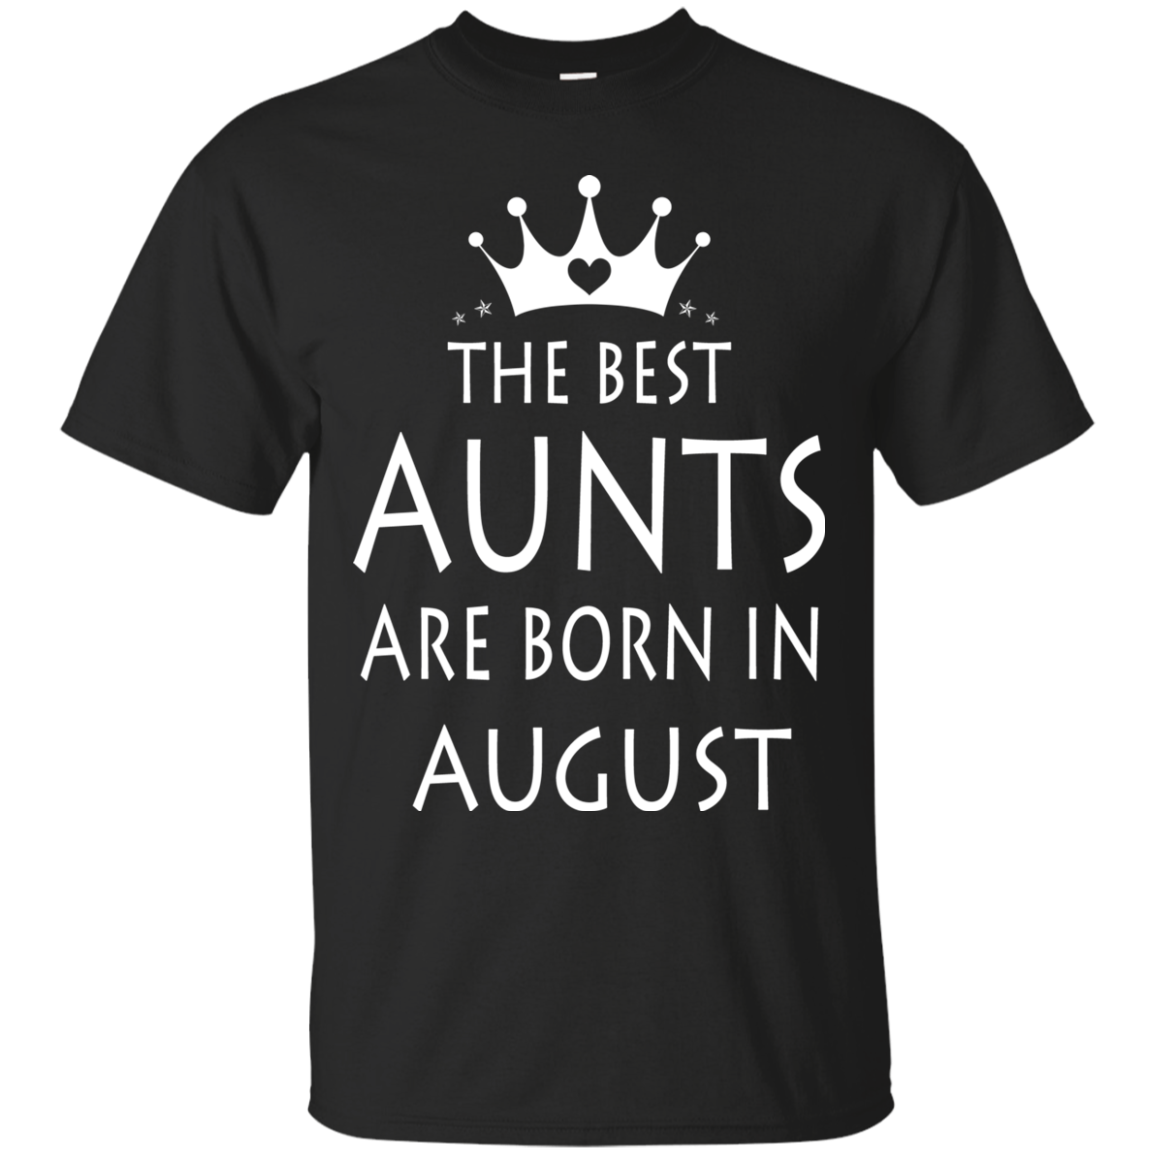 The best Aunts are born in August shirt, tank, sweater